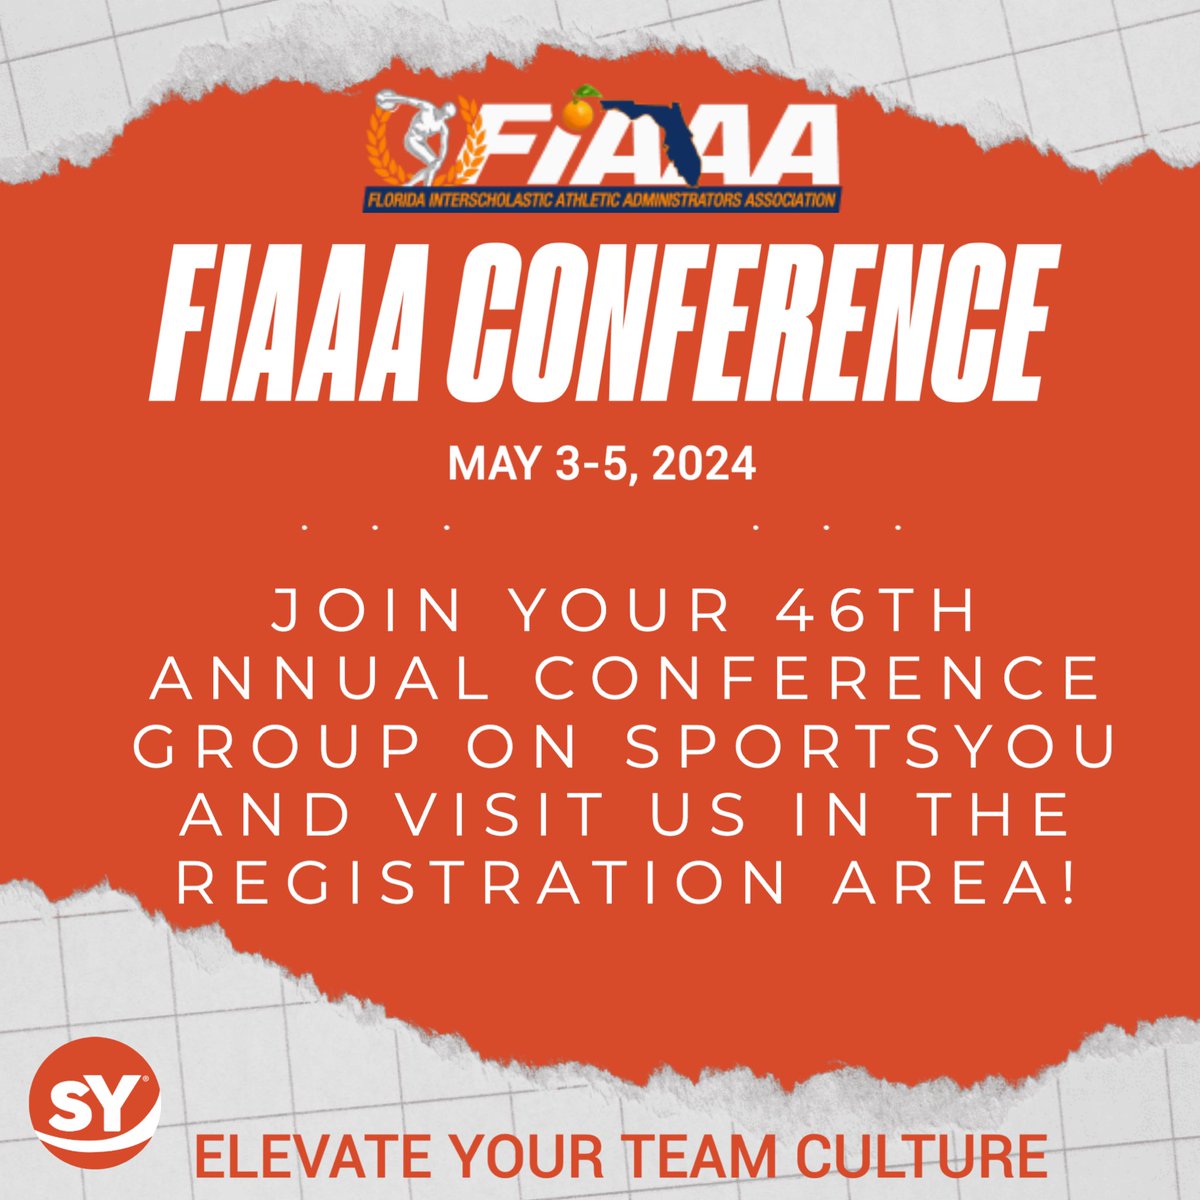 sportsYou is attending the FIAAA Conference! Join your 46th annual conference group on sportsYou and visit us in the registration area. Elevate your team culture with sportsYou.🏆 #sportscommunication #sportsyou